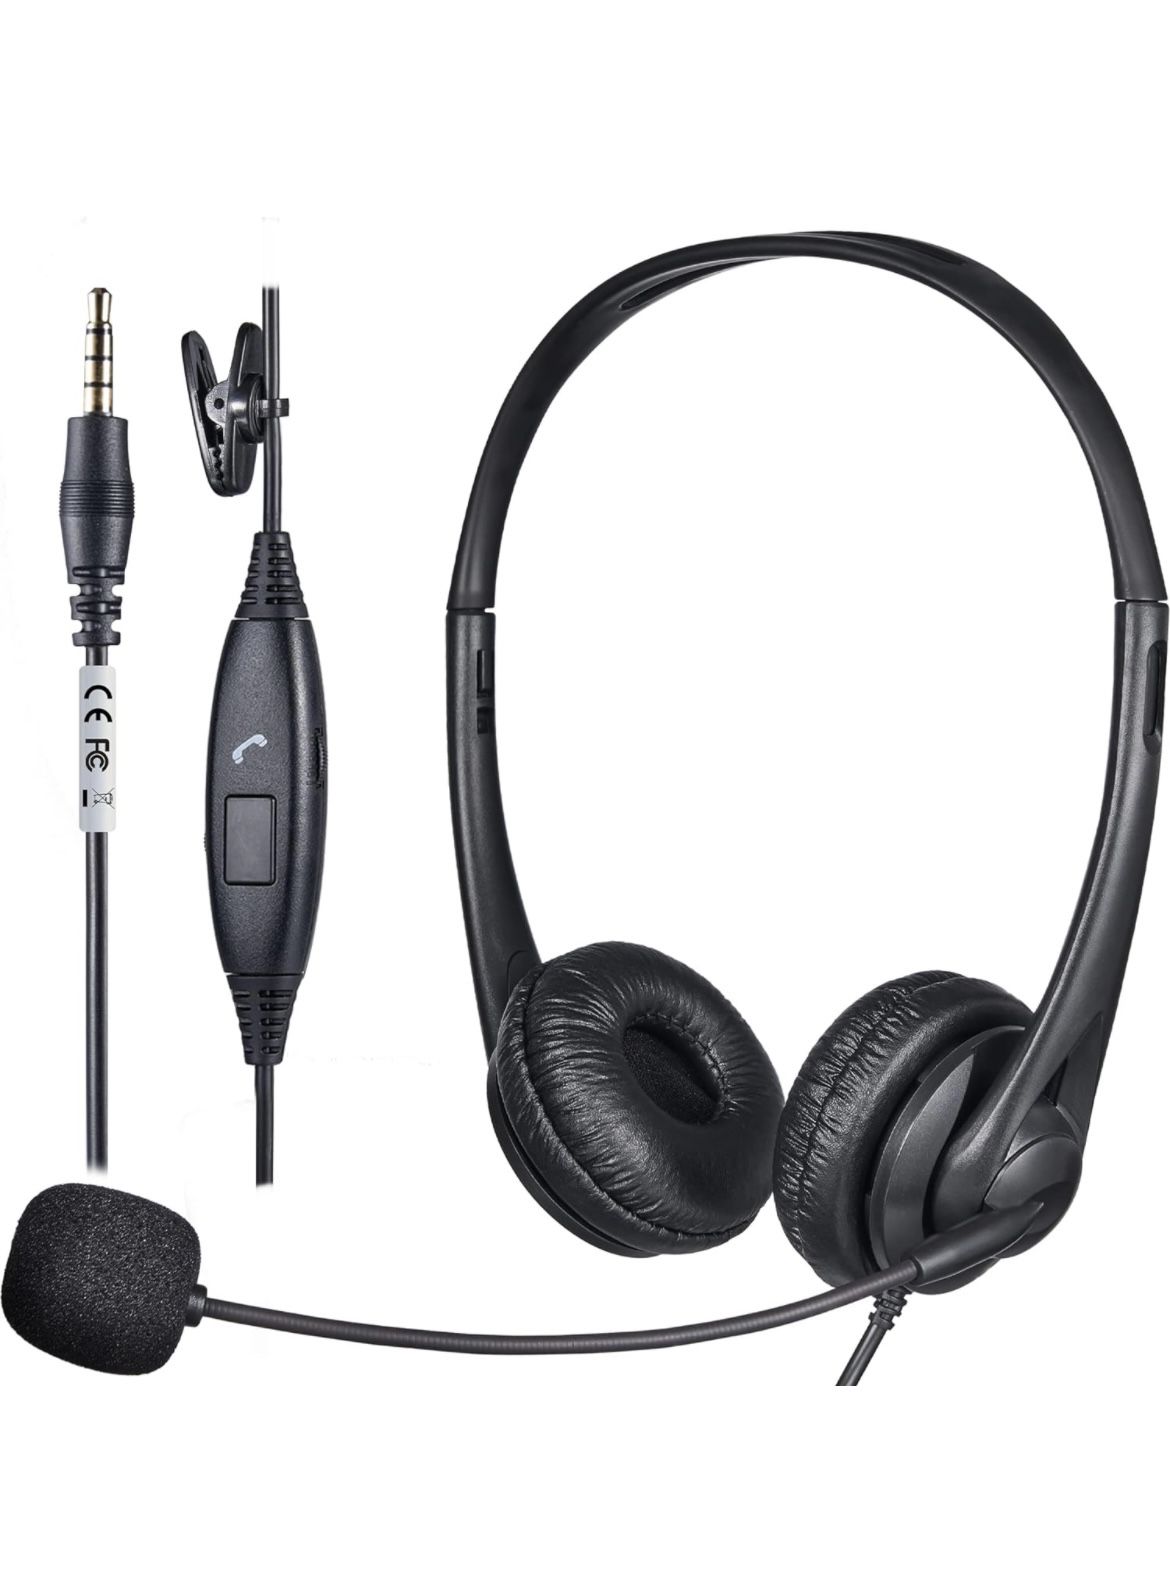 VOICETEK • Ultralight Headset with Microphone for Work - 3.5mm Wired Computer Headset with Mic, Noise Cancelling, Mute & Volume Control - Ideal for La